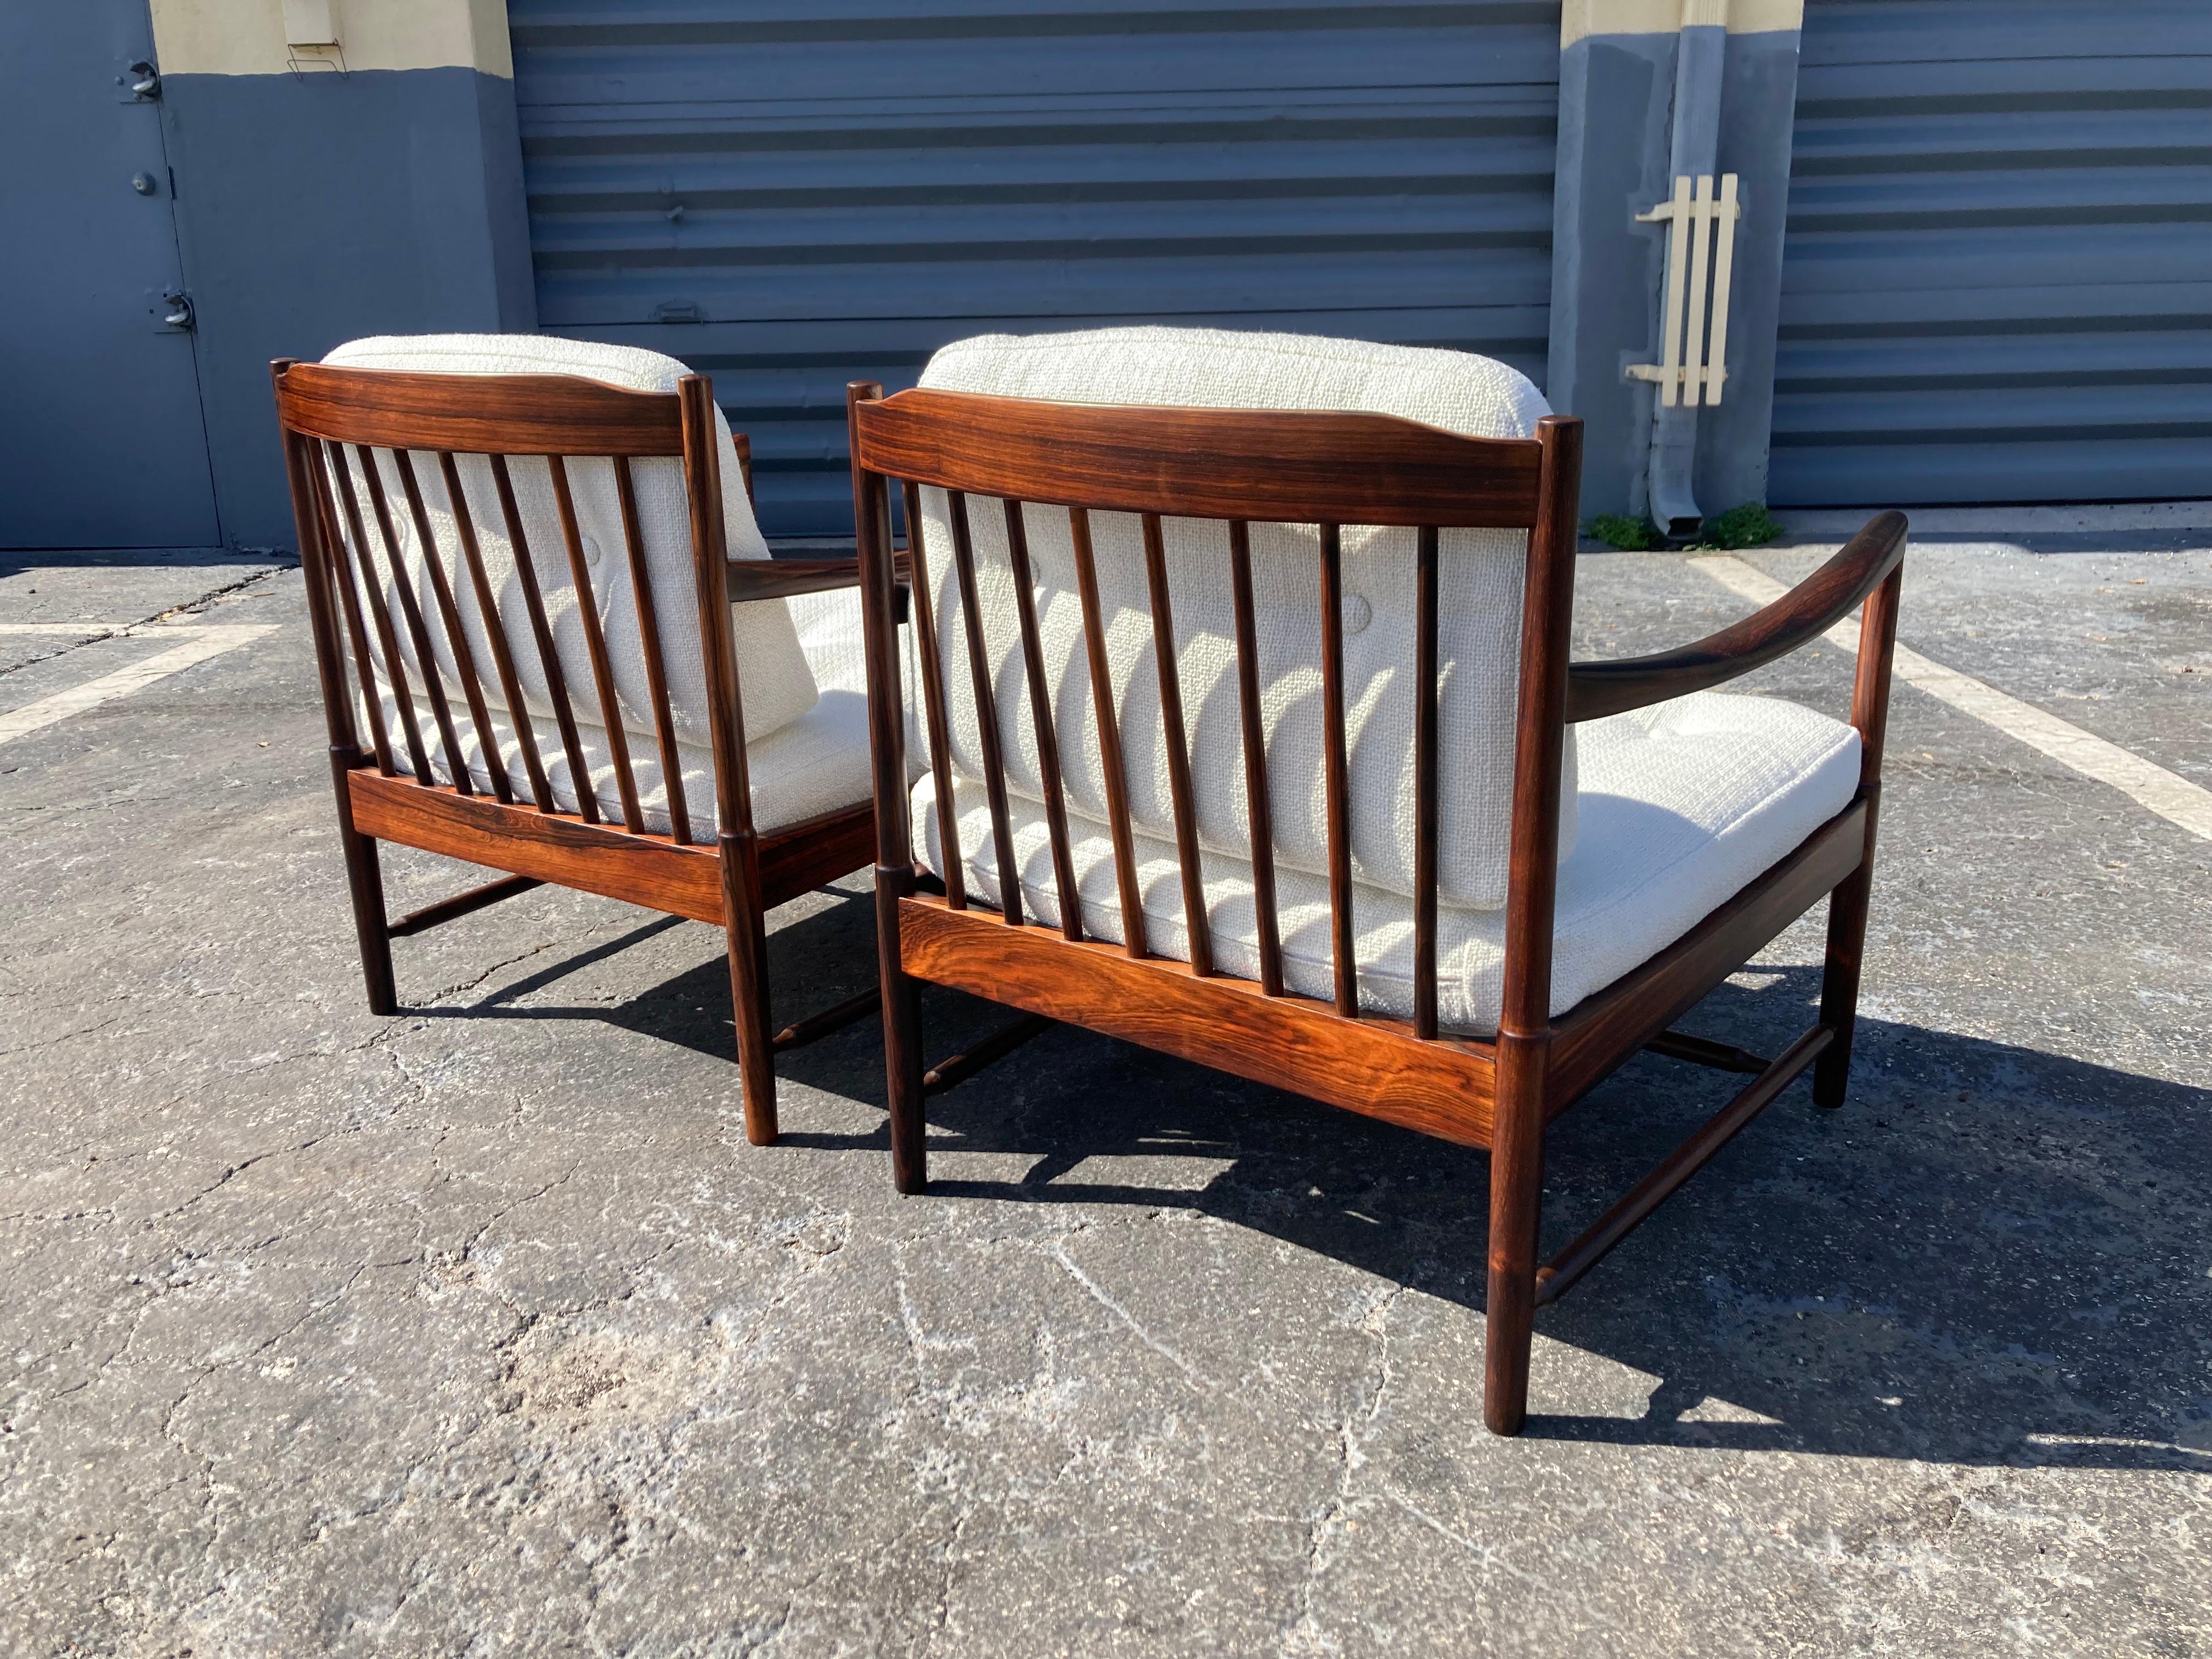 Pair of Rosewood Lounge Chairs Attributed to Kofod Larsen, Danish Modern In Excellent Condition For Sale In Miami, FL